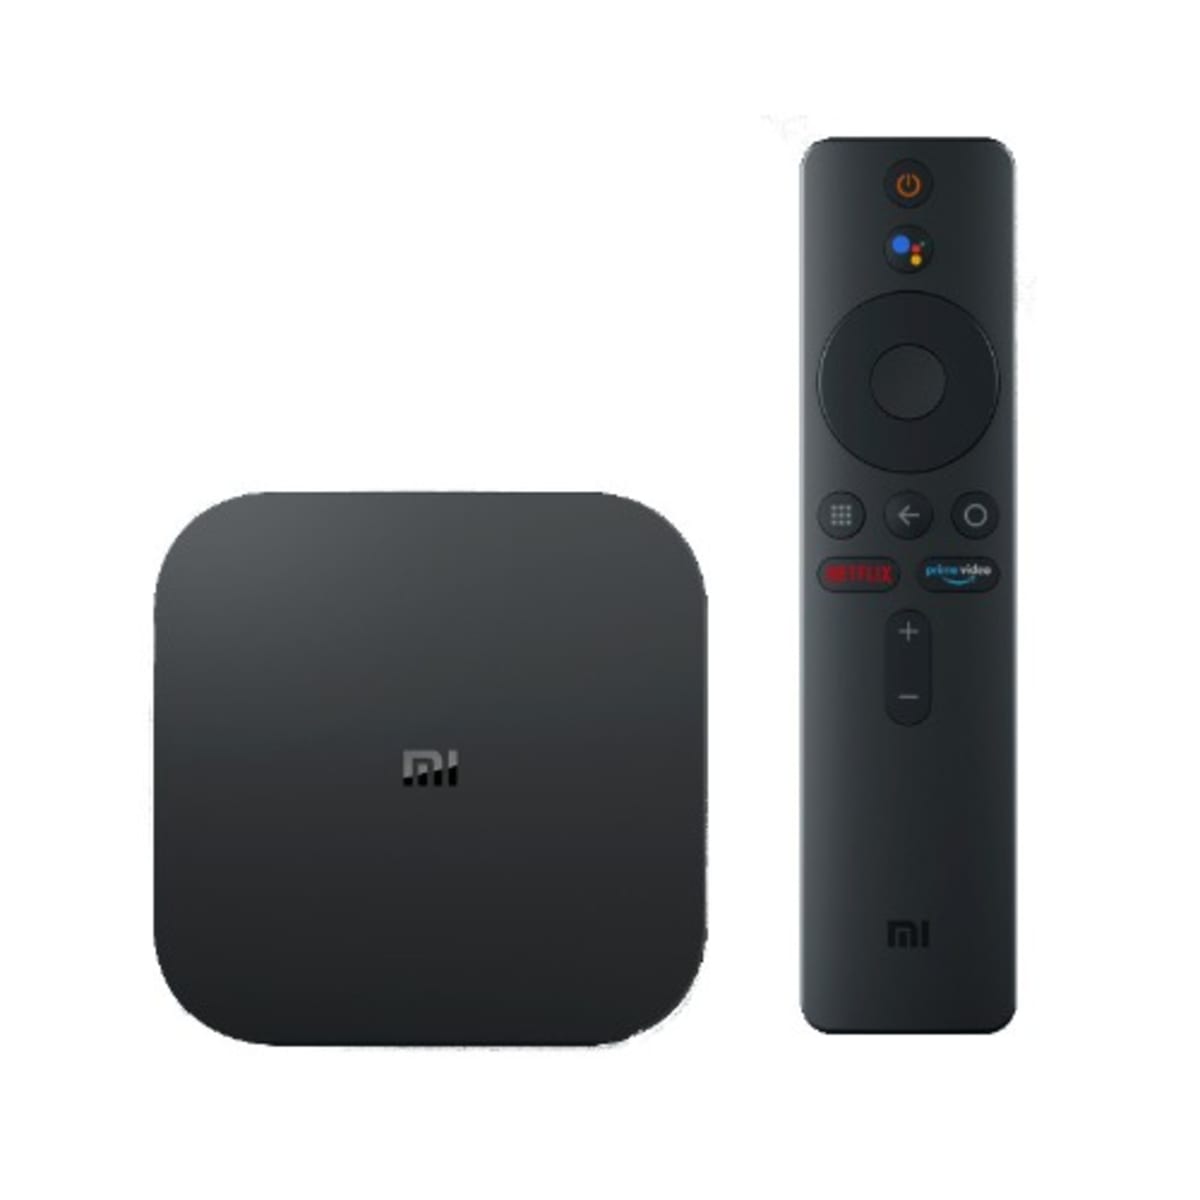 Xiaomi Mi Box S 4K HDR Streaming Media Player with Remote Control